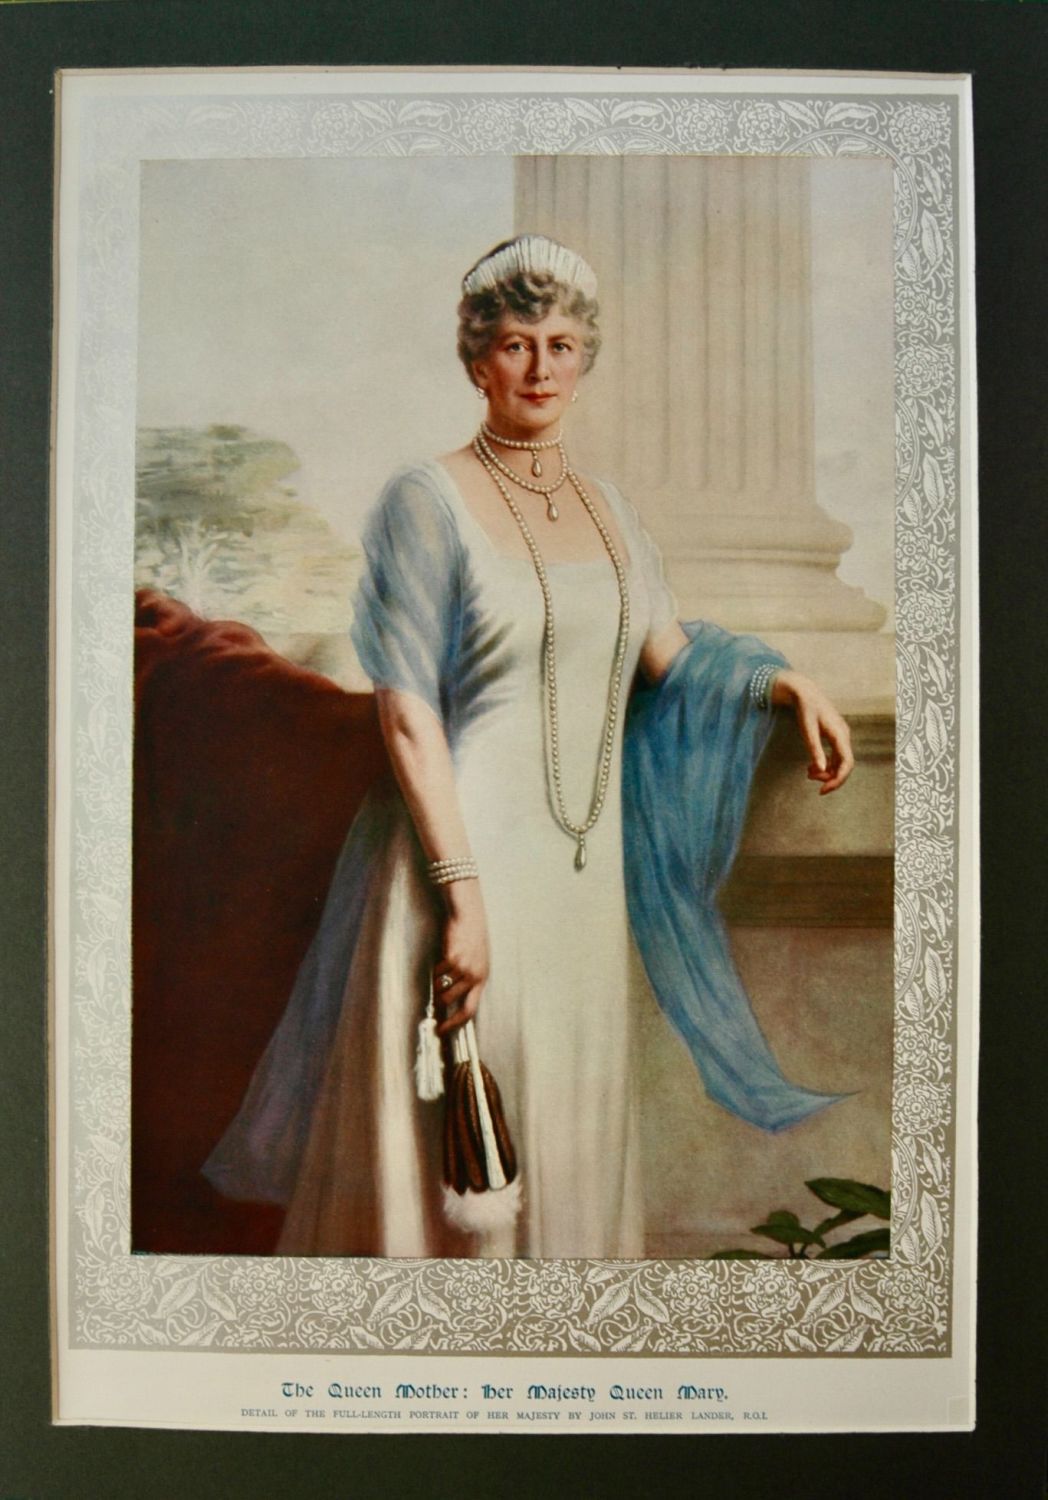 The Queen Mother :  Her Majesty Queen Mary.